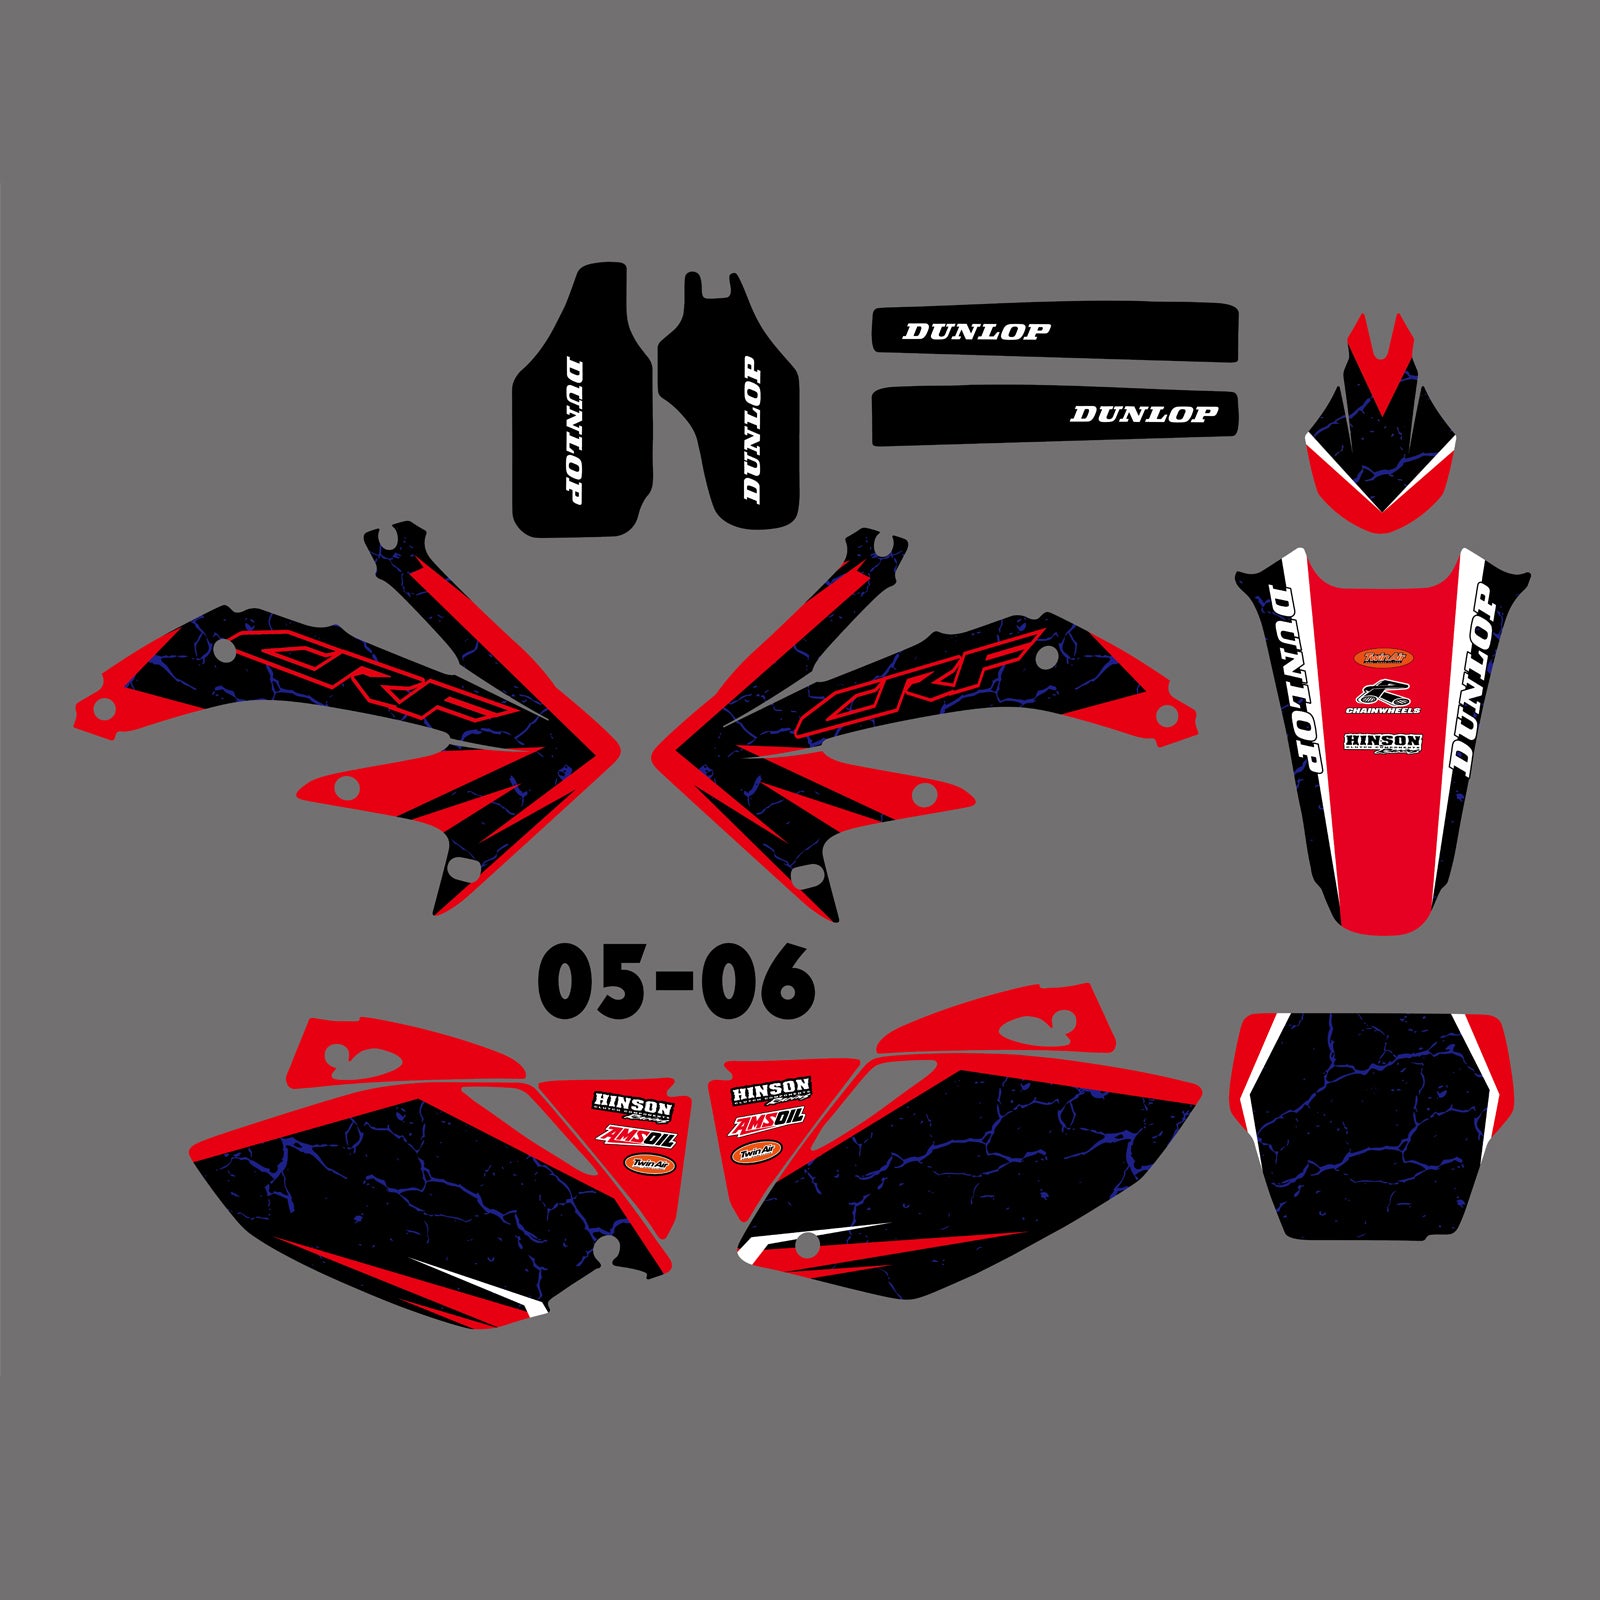 Motorcycle Full Graphics Background Decal Stickers for Honda CRF450R CRF450 2005-2006